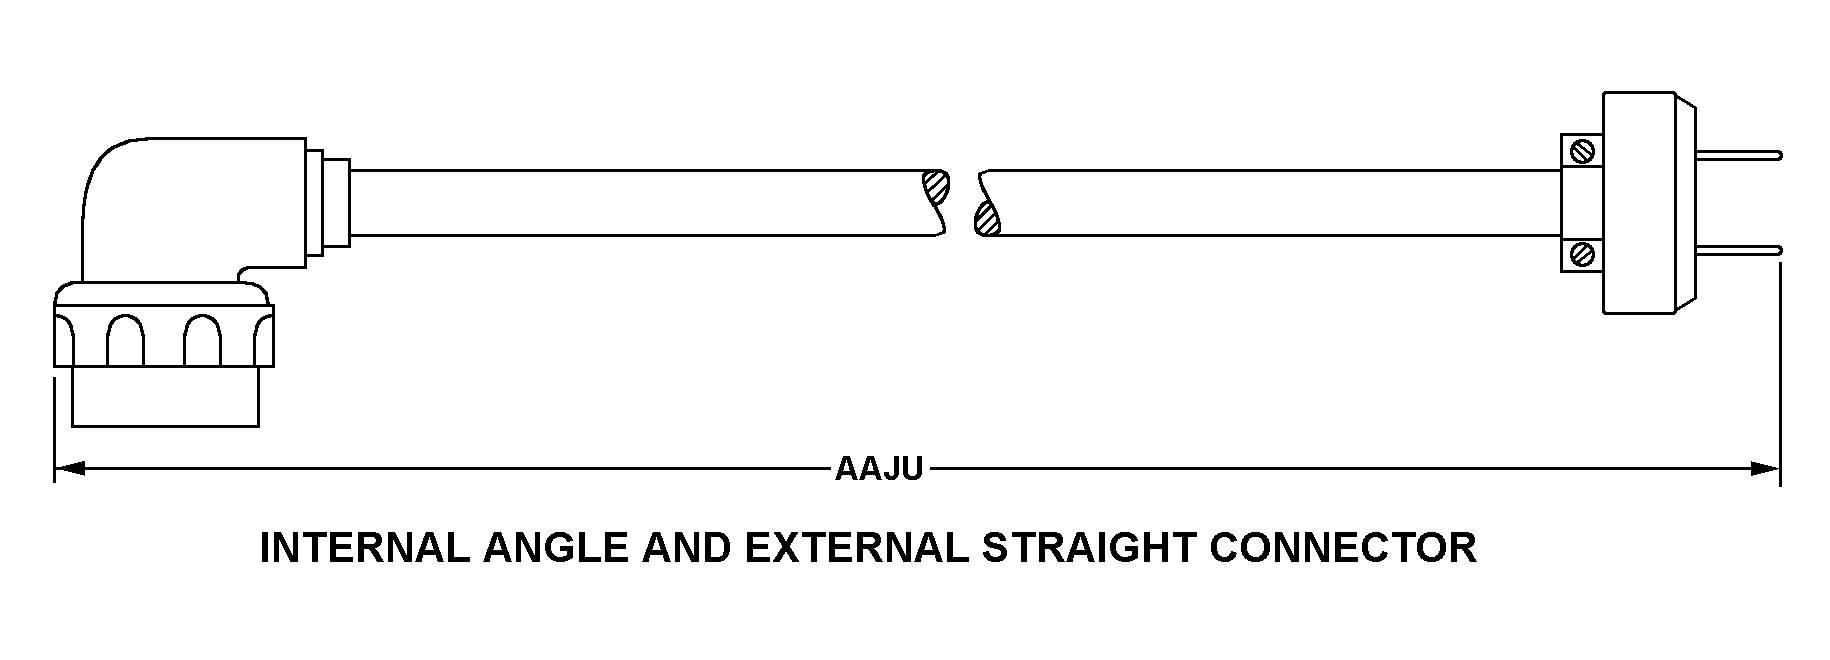 INTERNAL ANGLE AND EXTERNAL STRAIGHT CONNECTOR style nsn 5995-01-362-0183